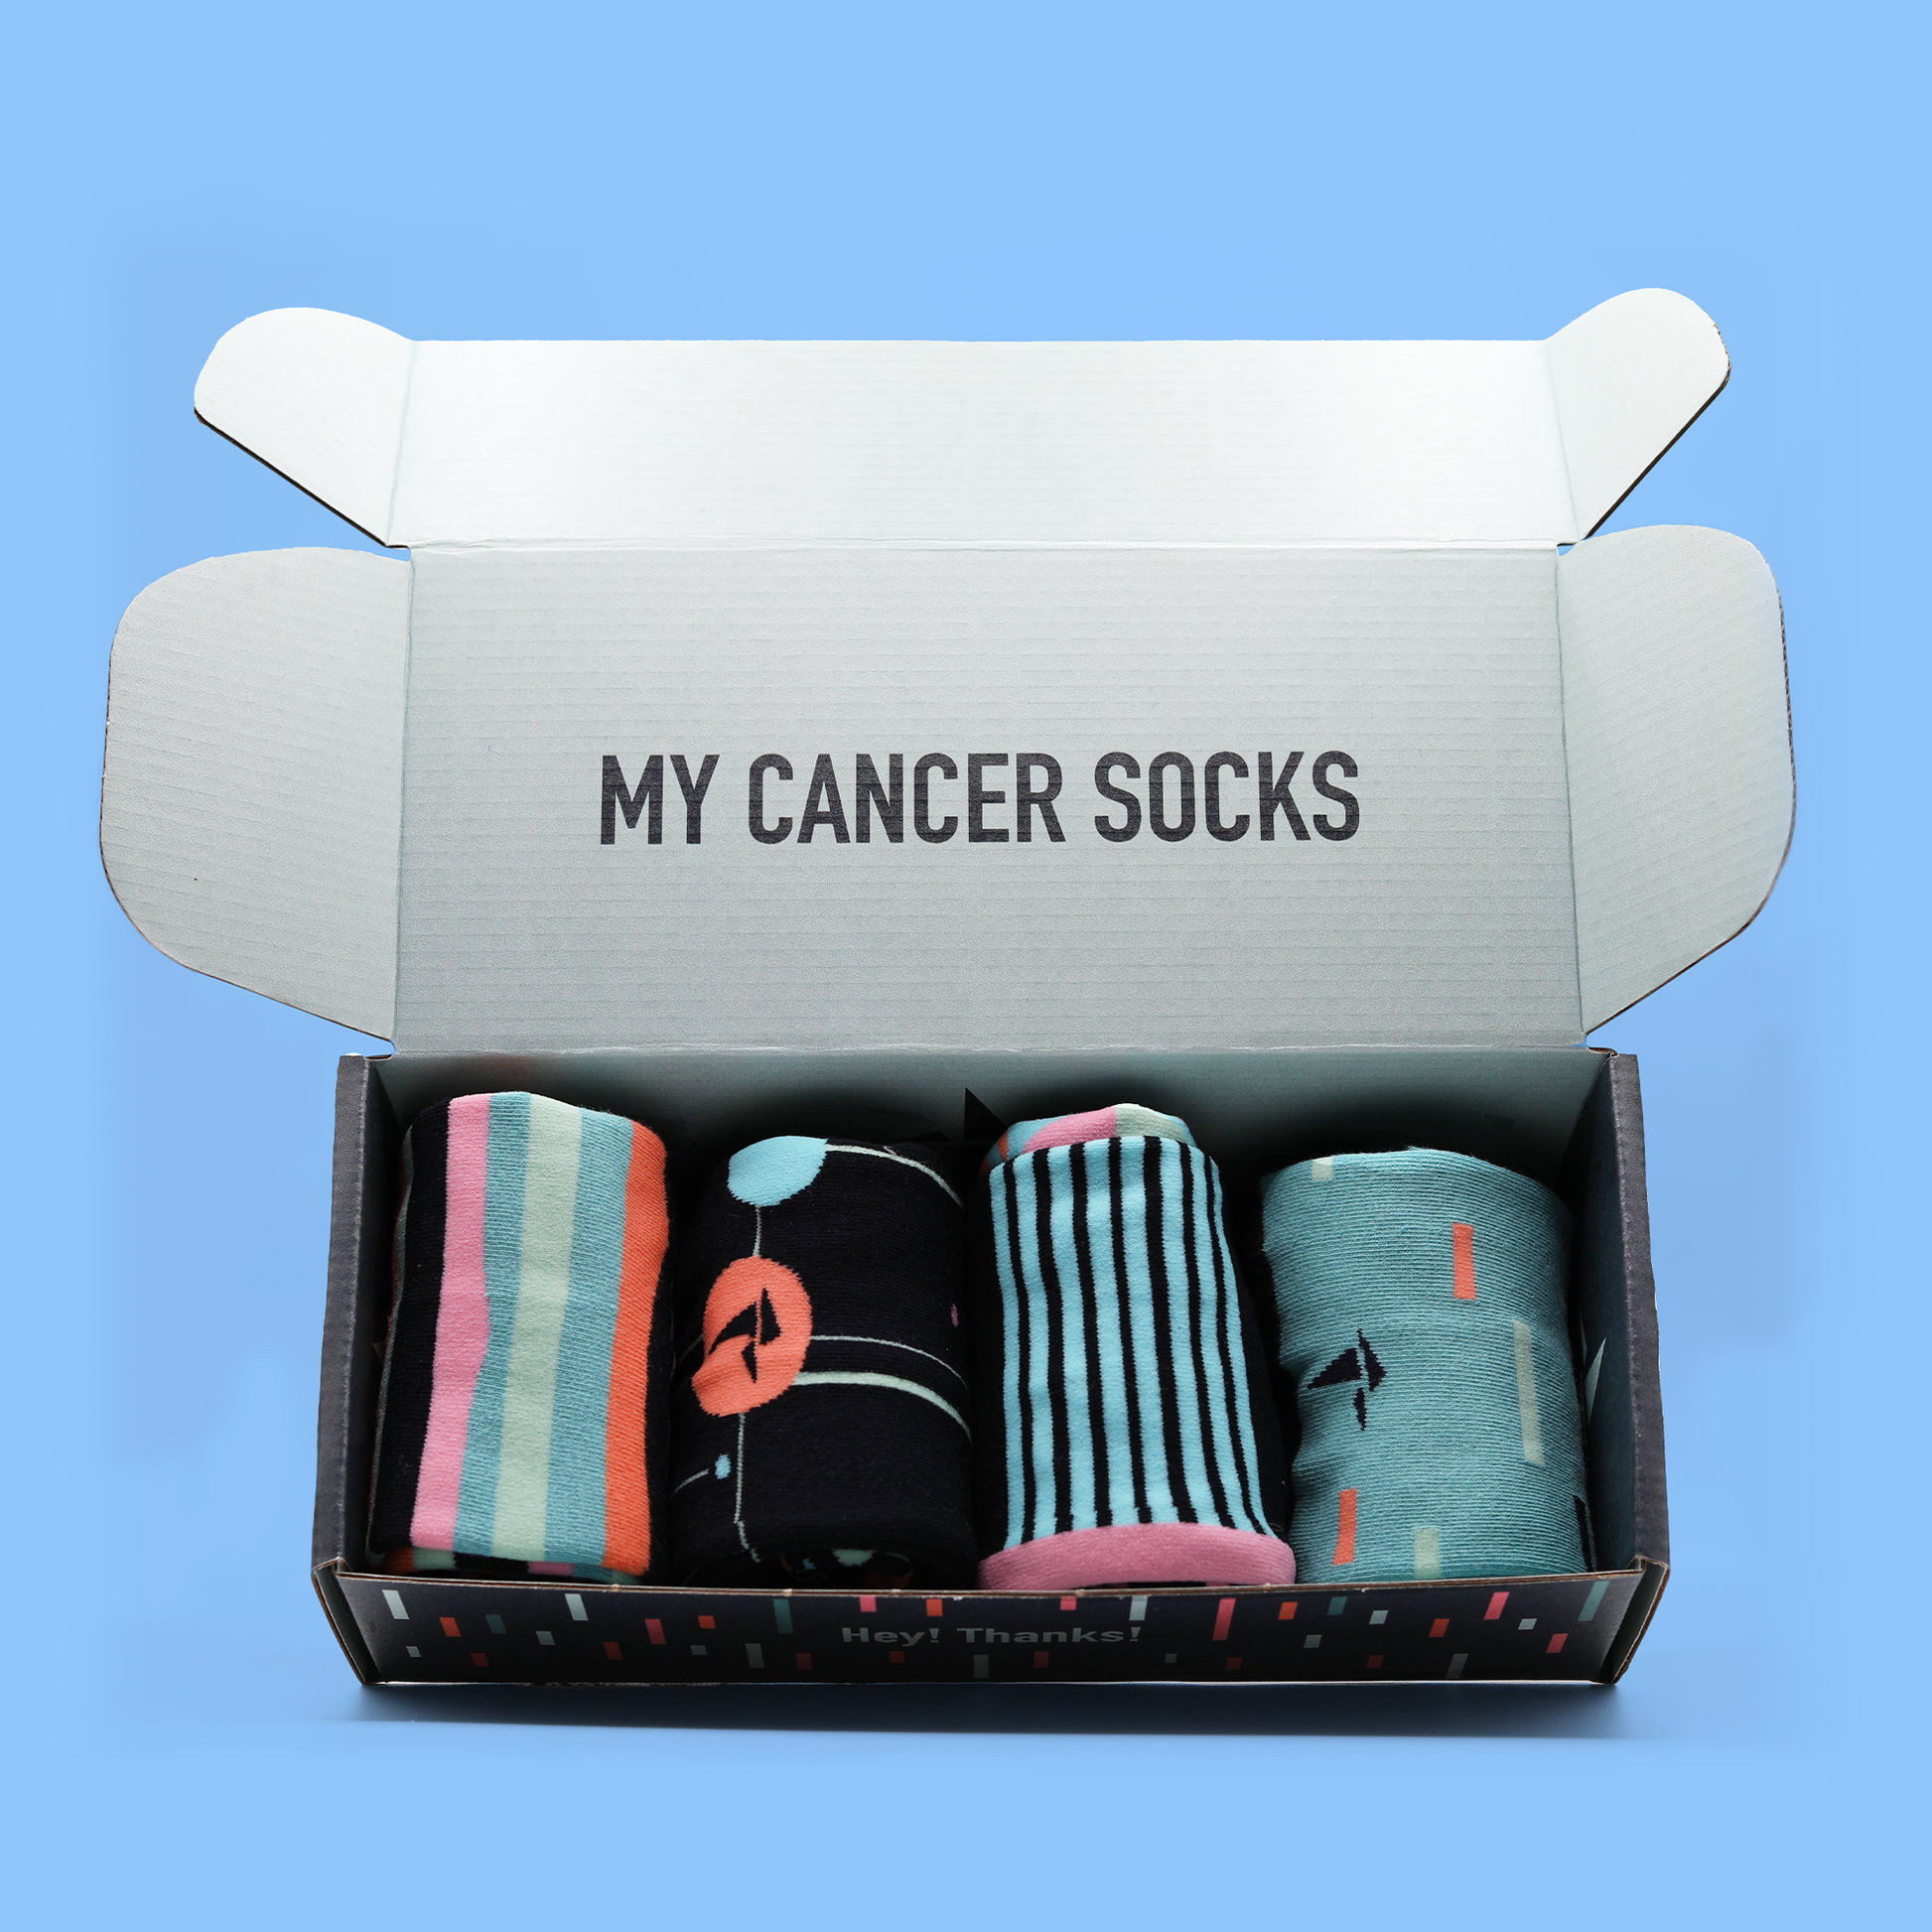 An open box of Hank's Cancer Socks in front of a blue background. The inside of the box reads "My Cancer Socks". The socks lay in a single row of four and are differing patterns with similar color schemes. The side of the box reads "Hey! Thanks!". An Awesome Socks Club product.